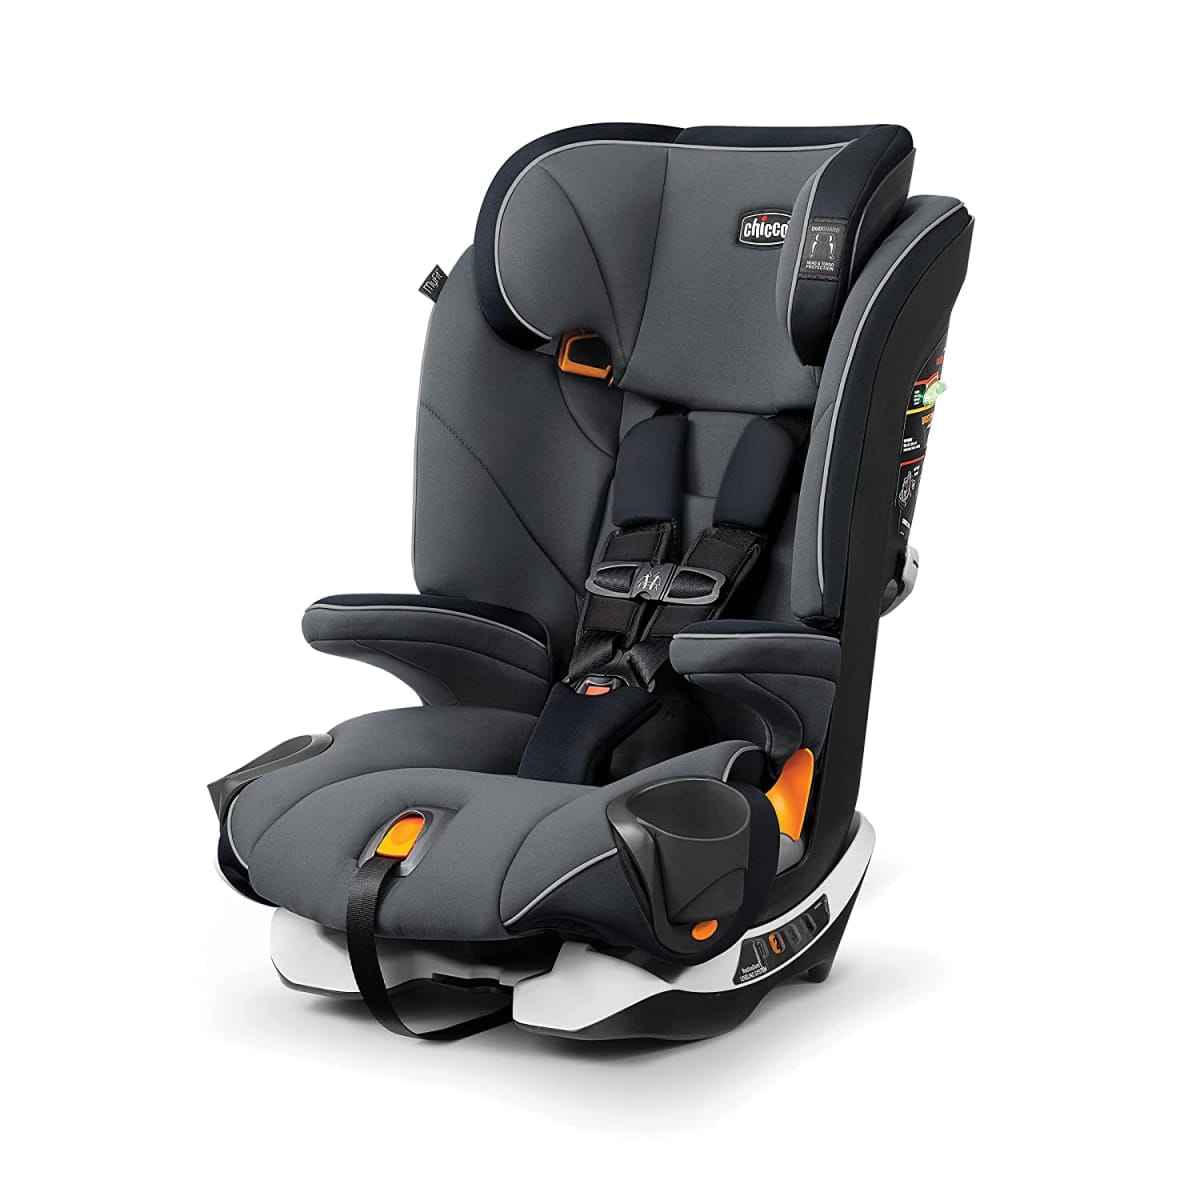 MyFit Harness + Booster Car Seat,